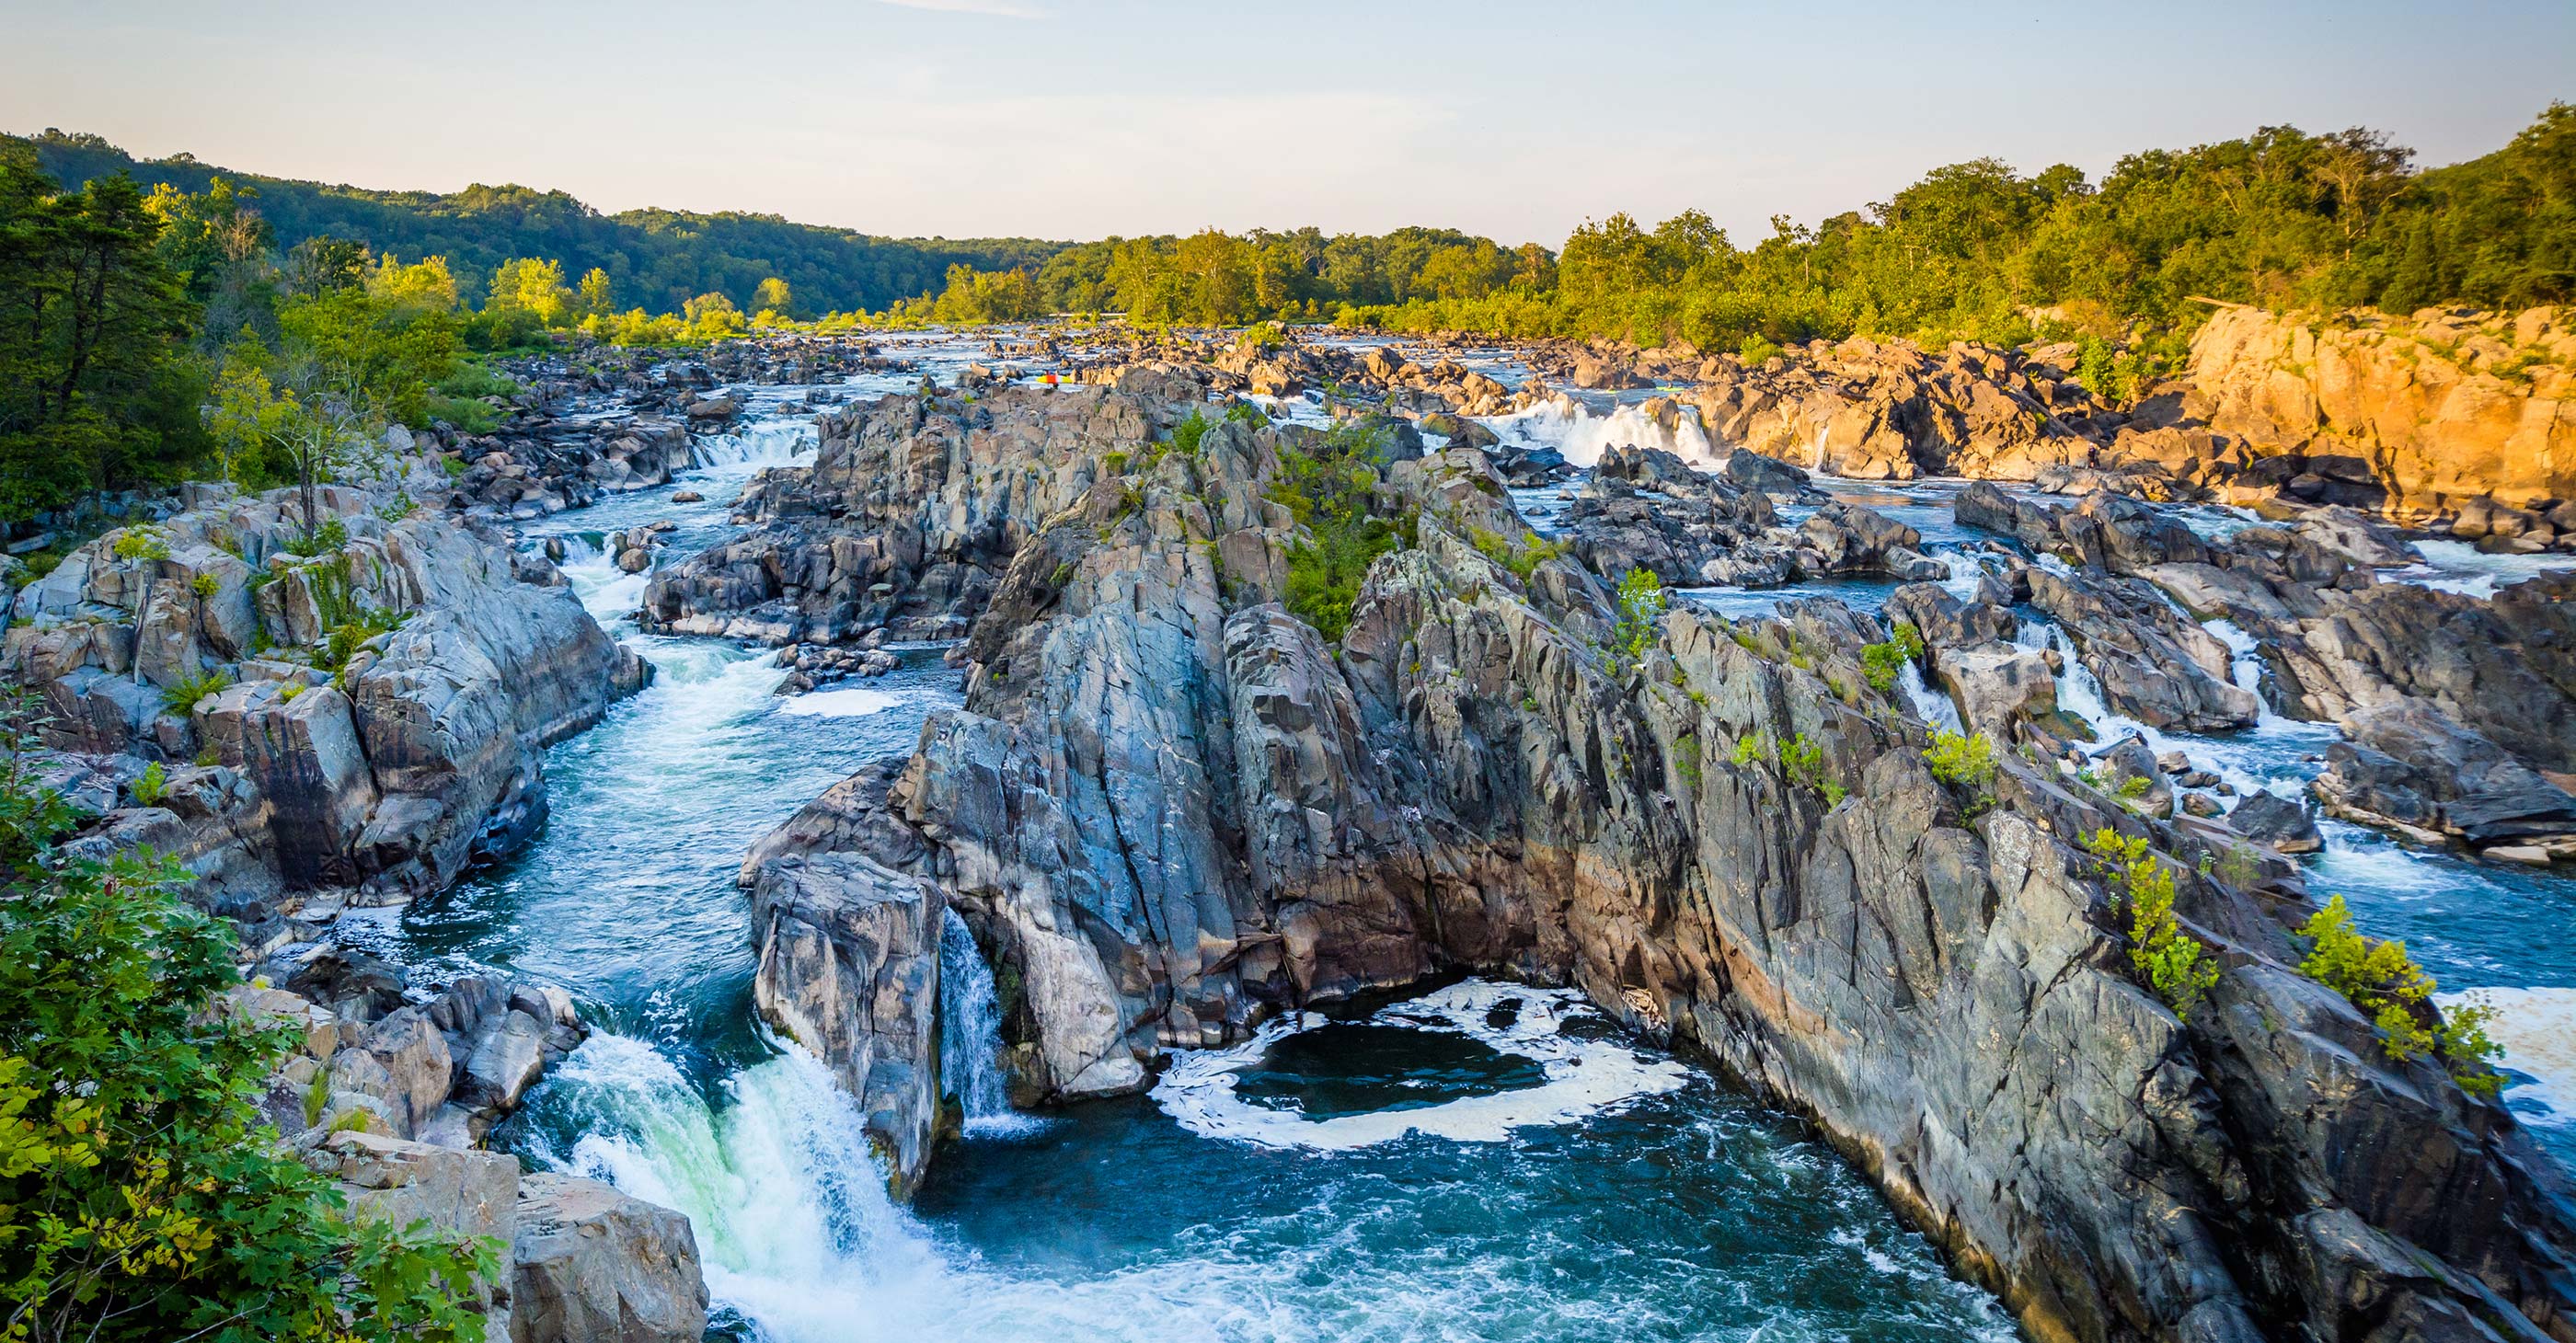 View of rapids in the Potomac River at sunset, at Great Falls Park, Virginia.